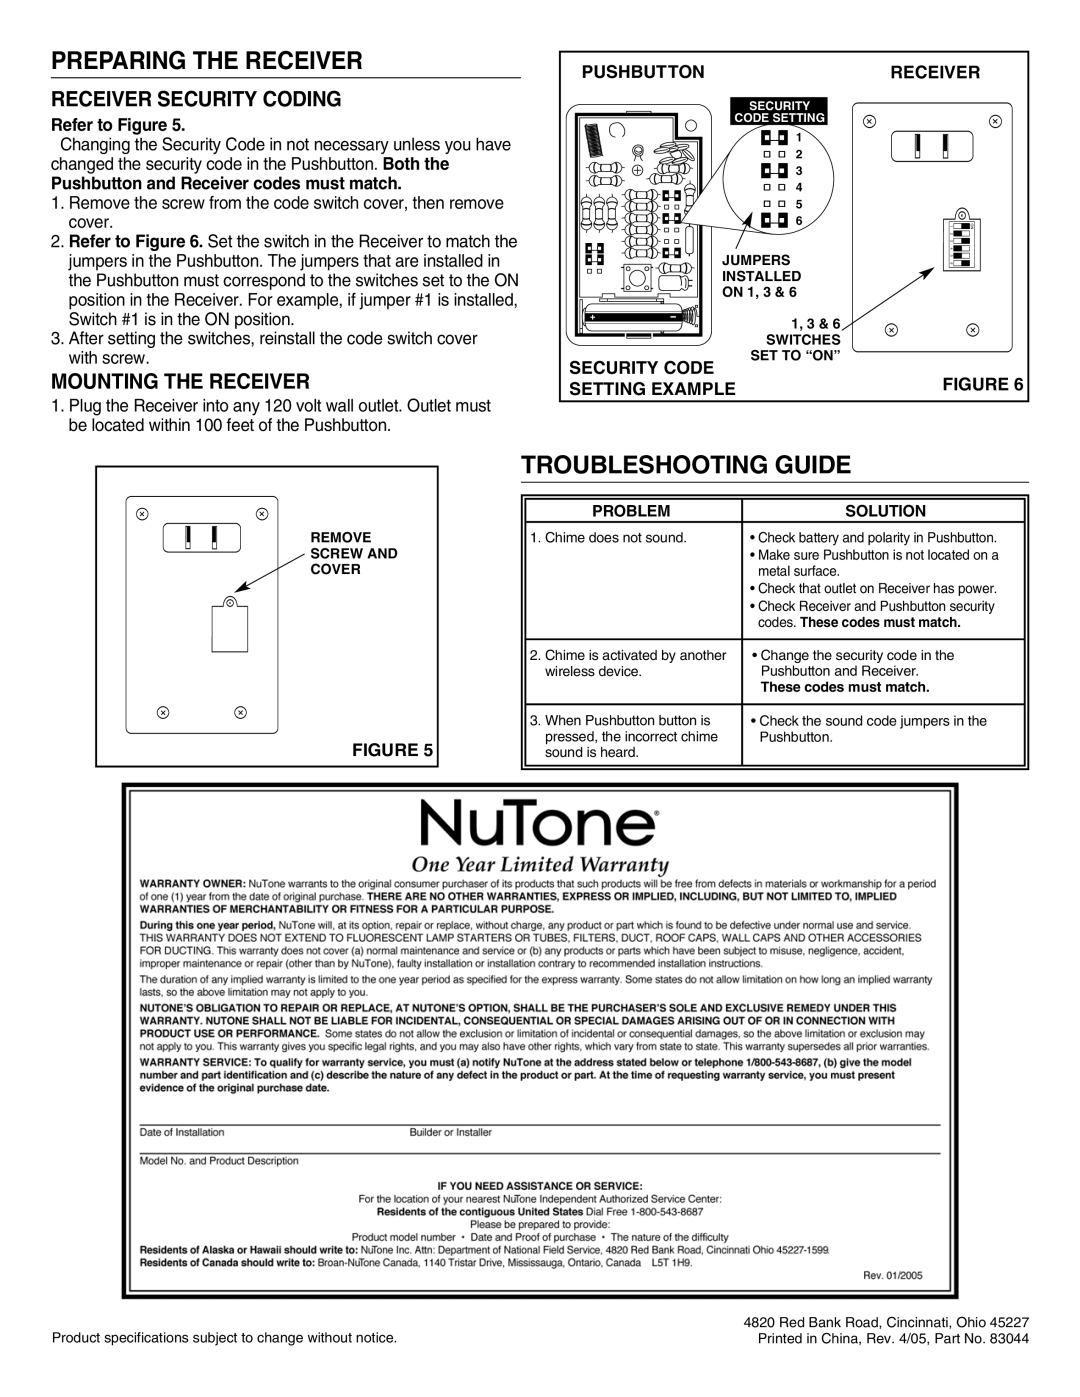 NuTone LA-204WH Preparing The Receiver, Troubleshooting Guide, Receiver Security Coding, Mounting The Receiver, Pushbutton 